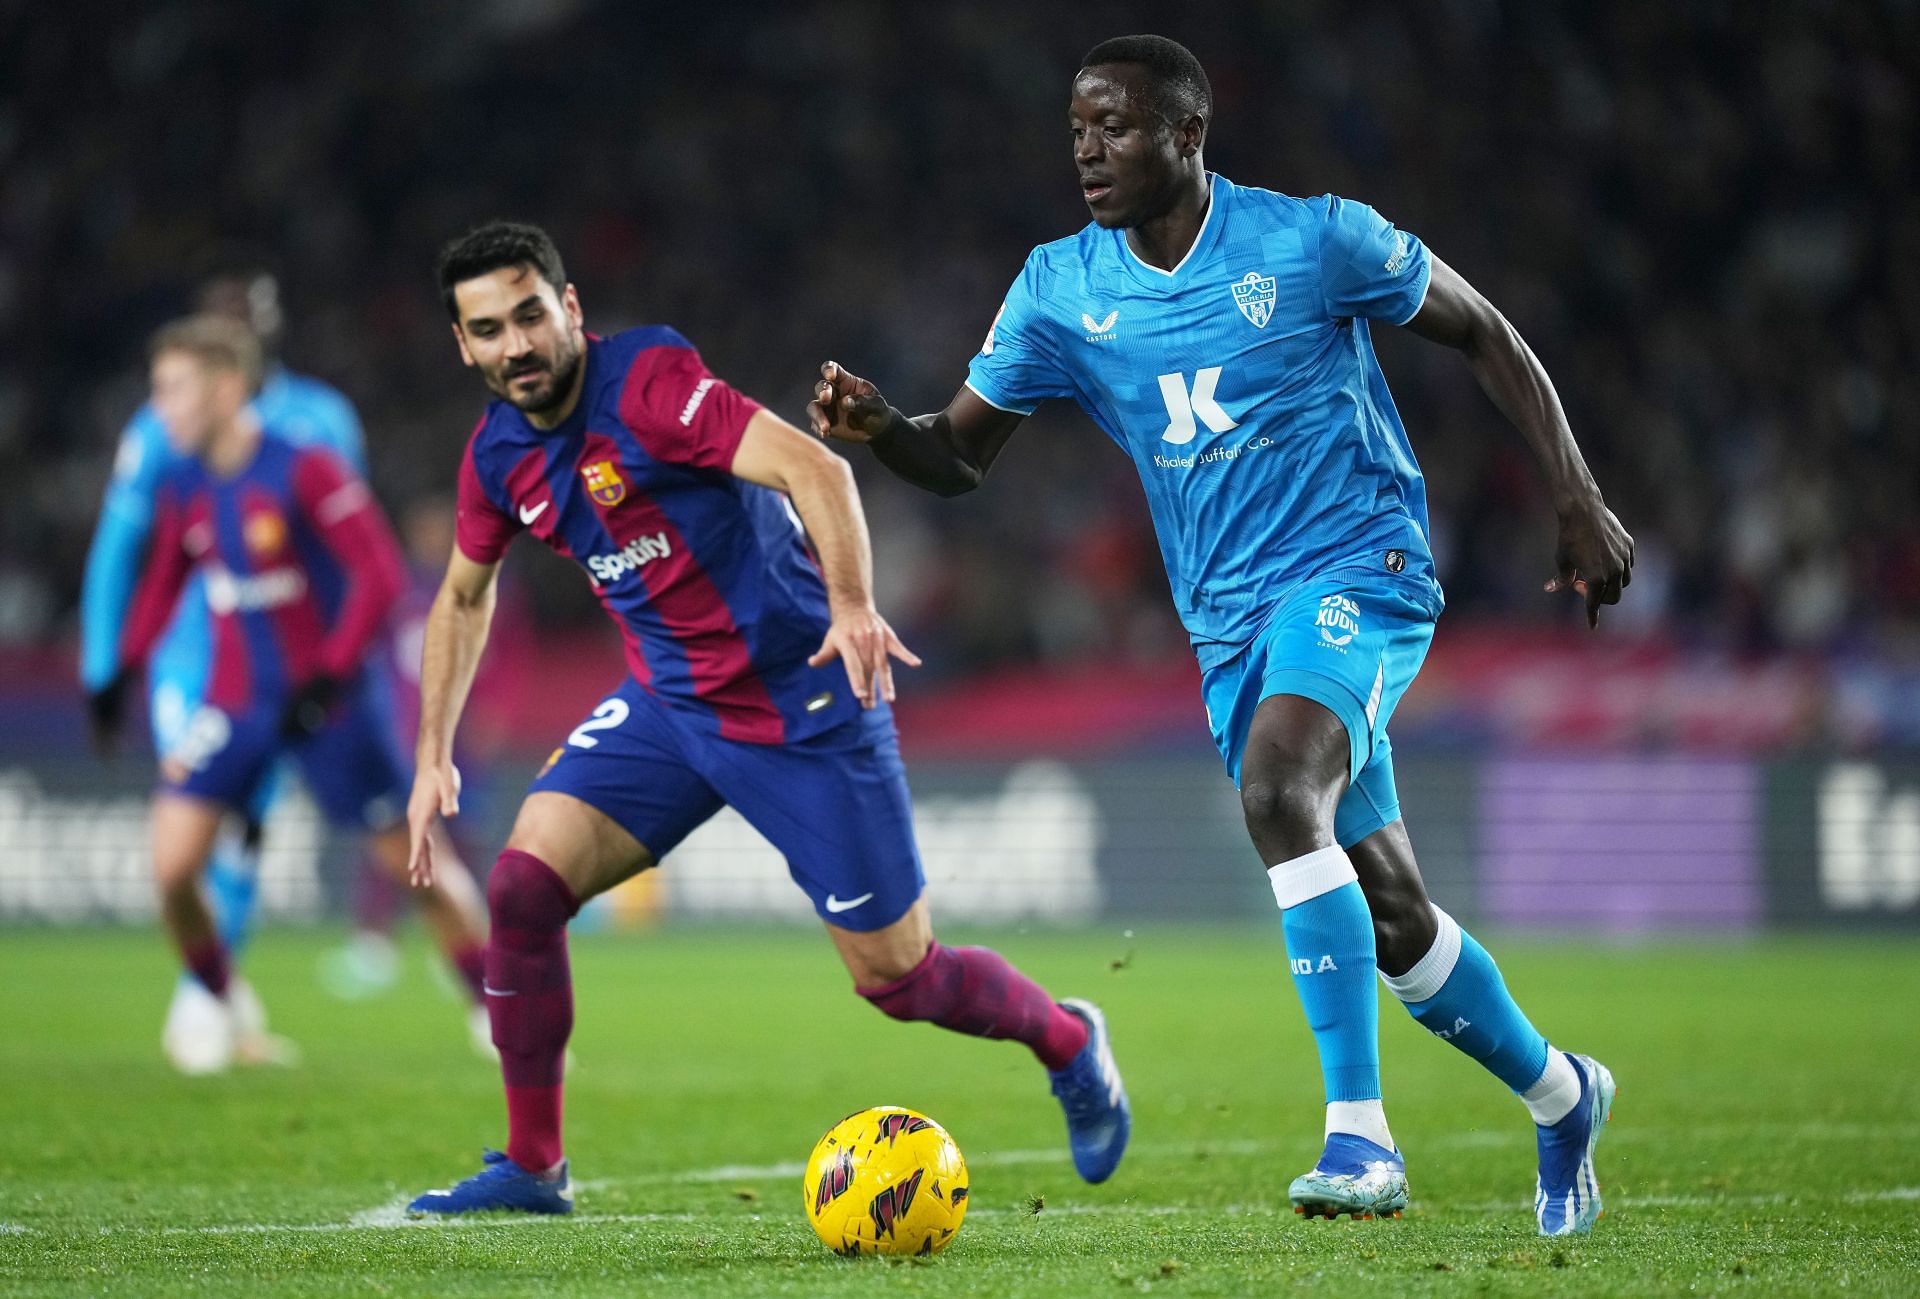 Dion Lopy has admirers at Camp Nou